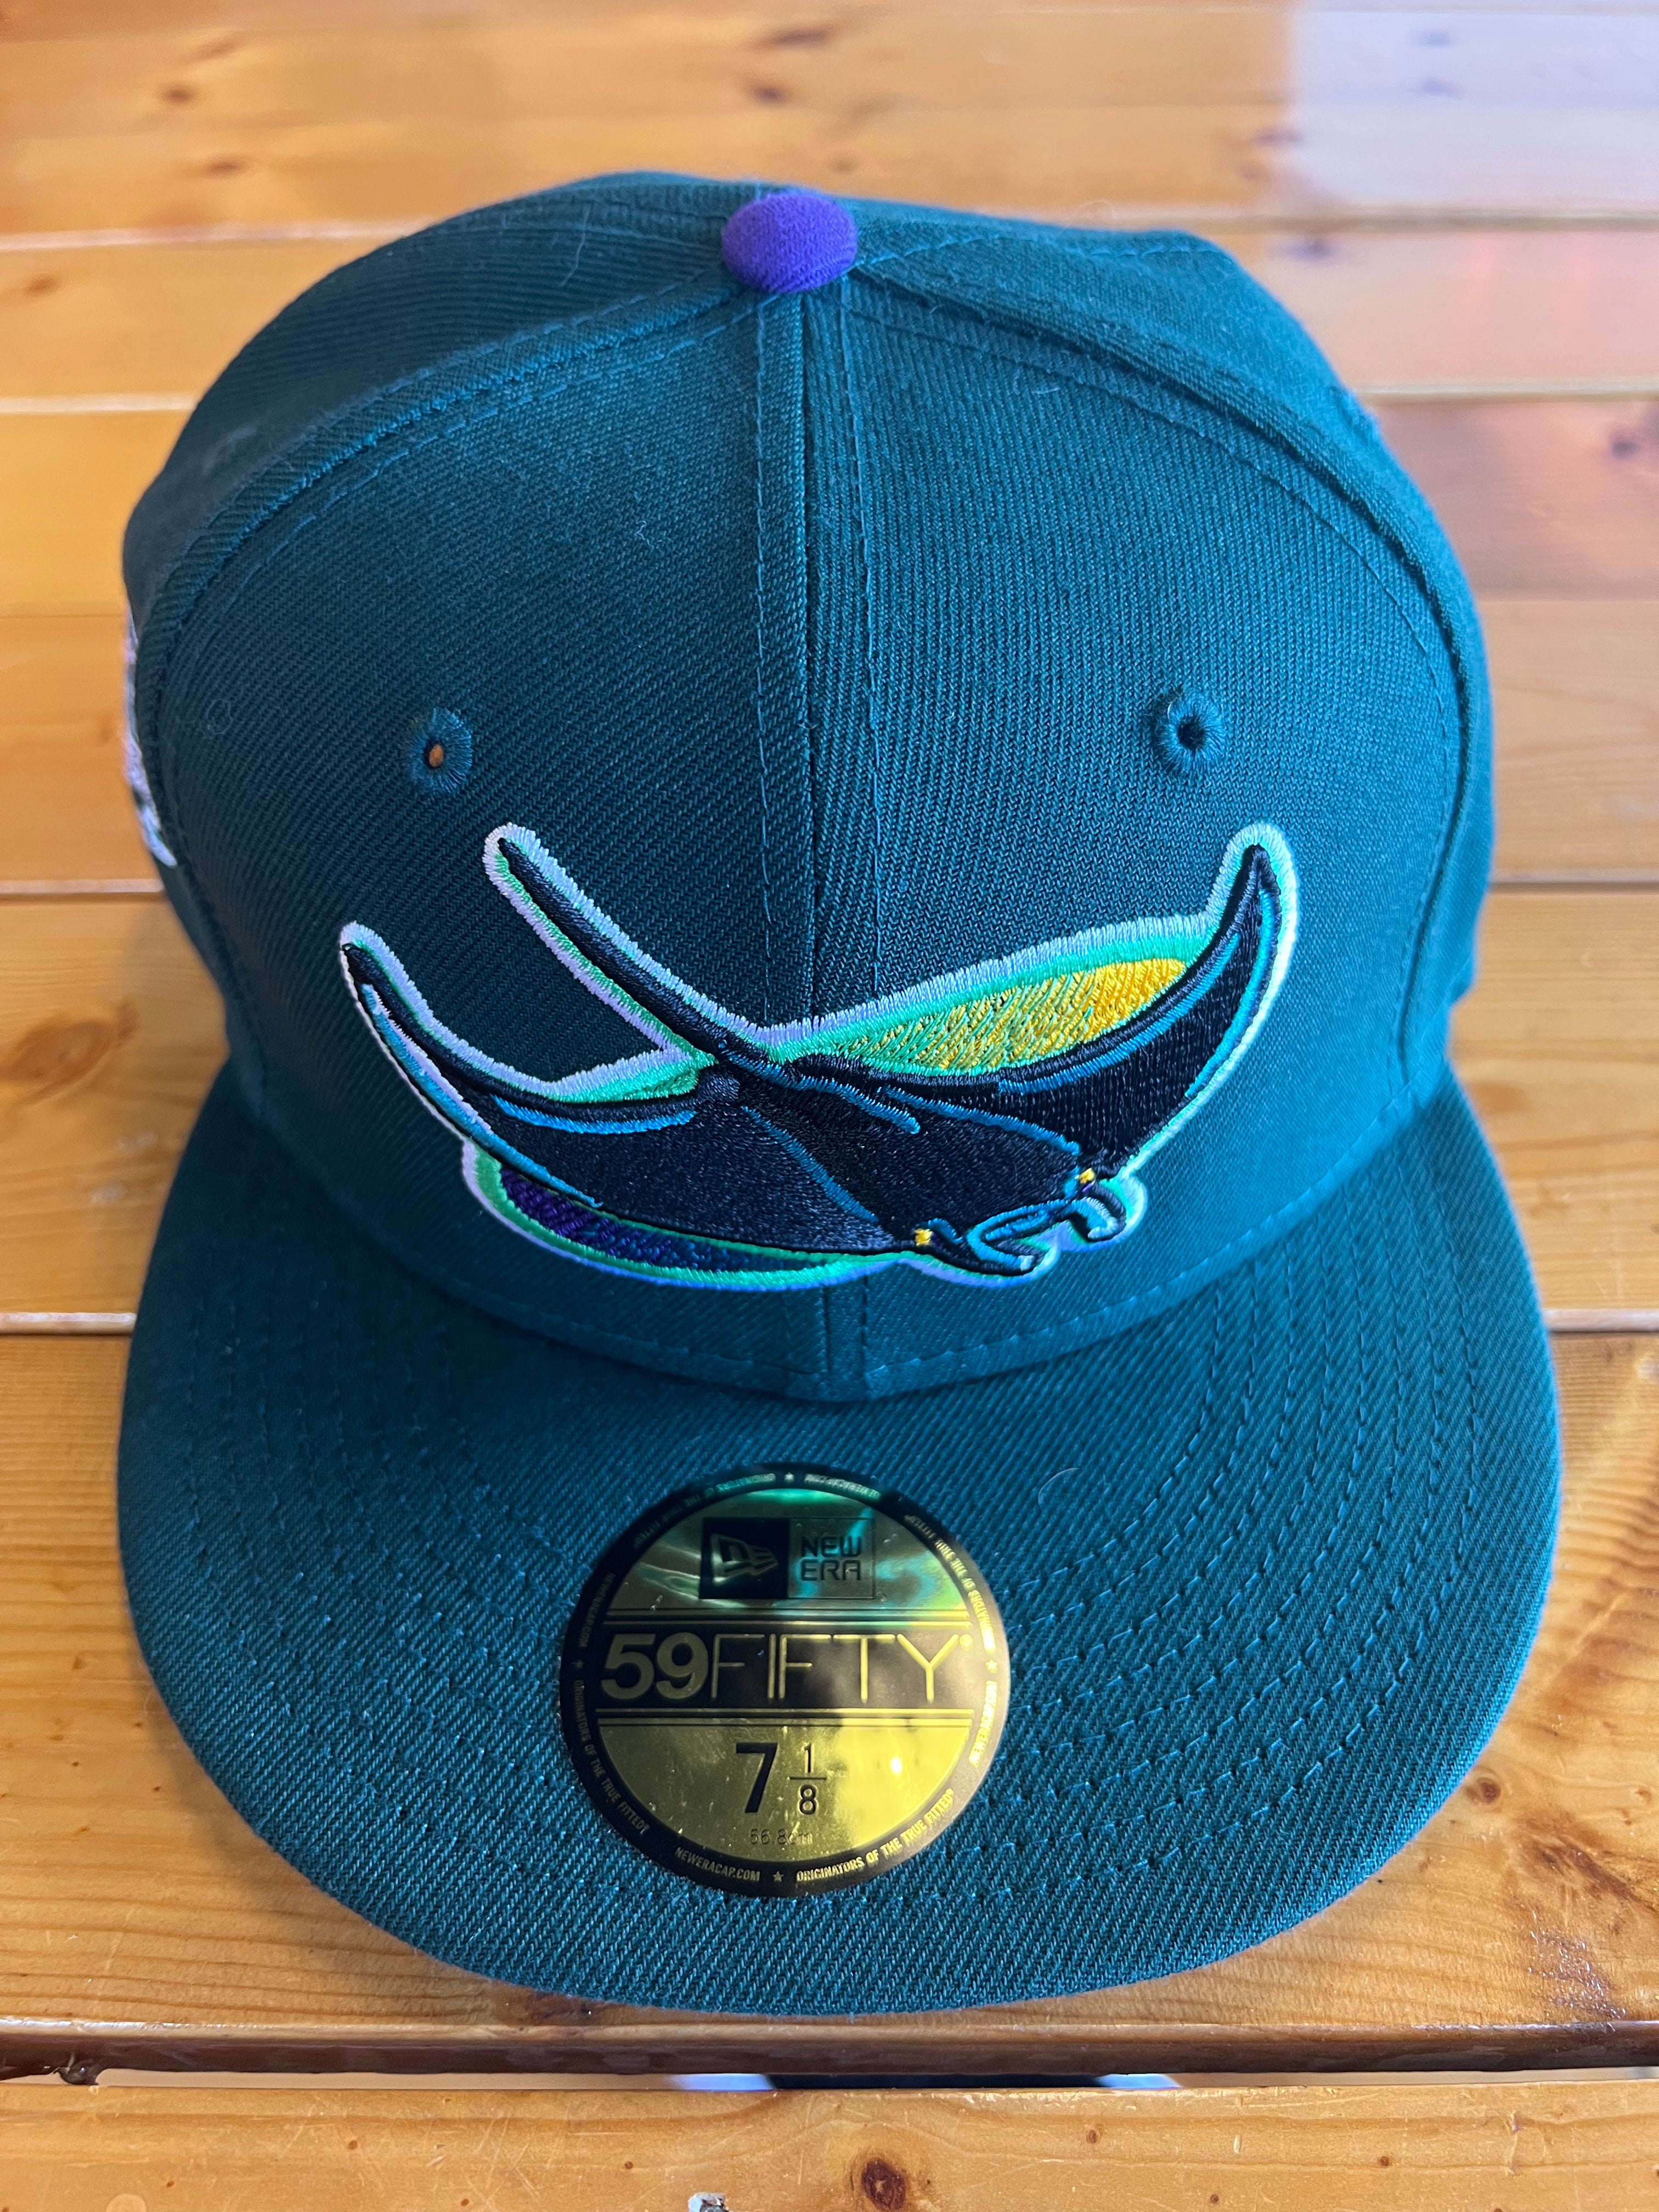 Exclusive Tampa Bay Devil Rays Inaugural Season 1998 Two Tone, Topperz 7 1/2